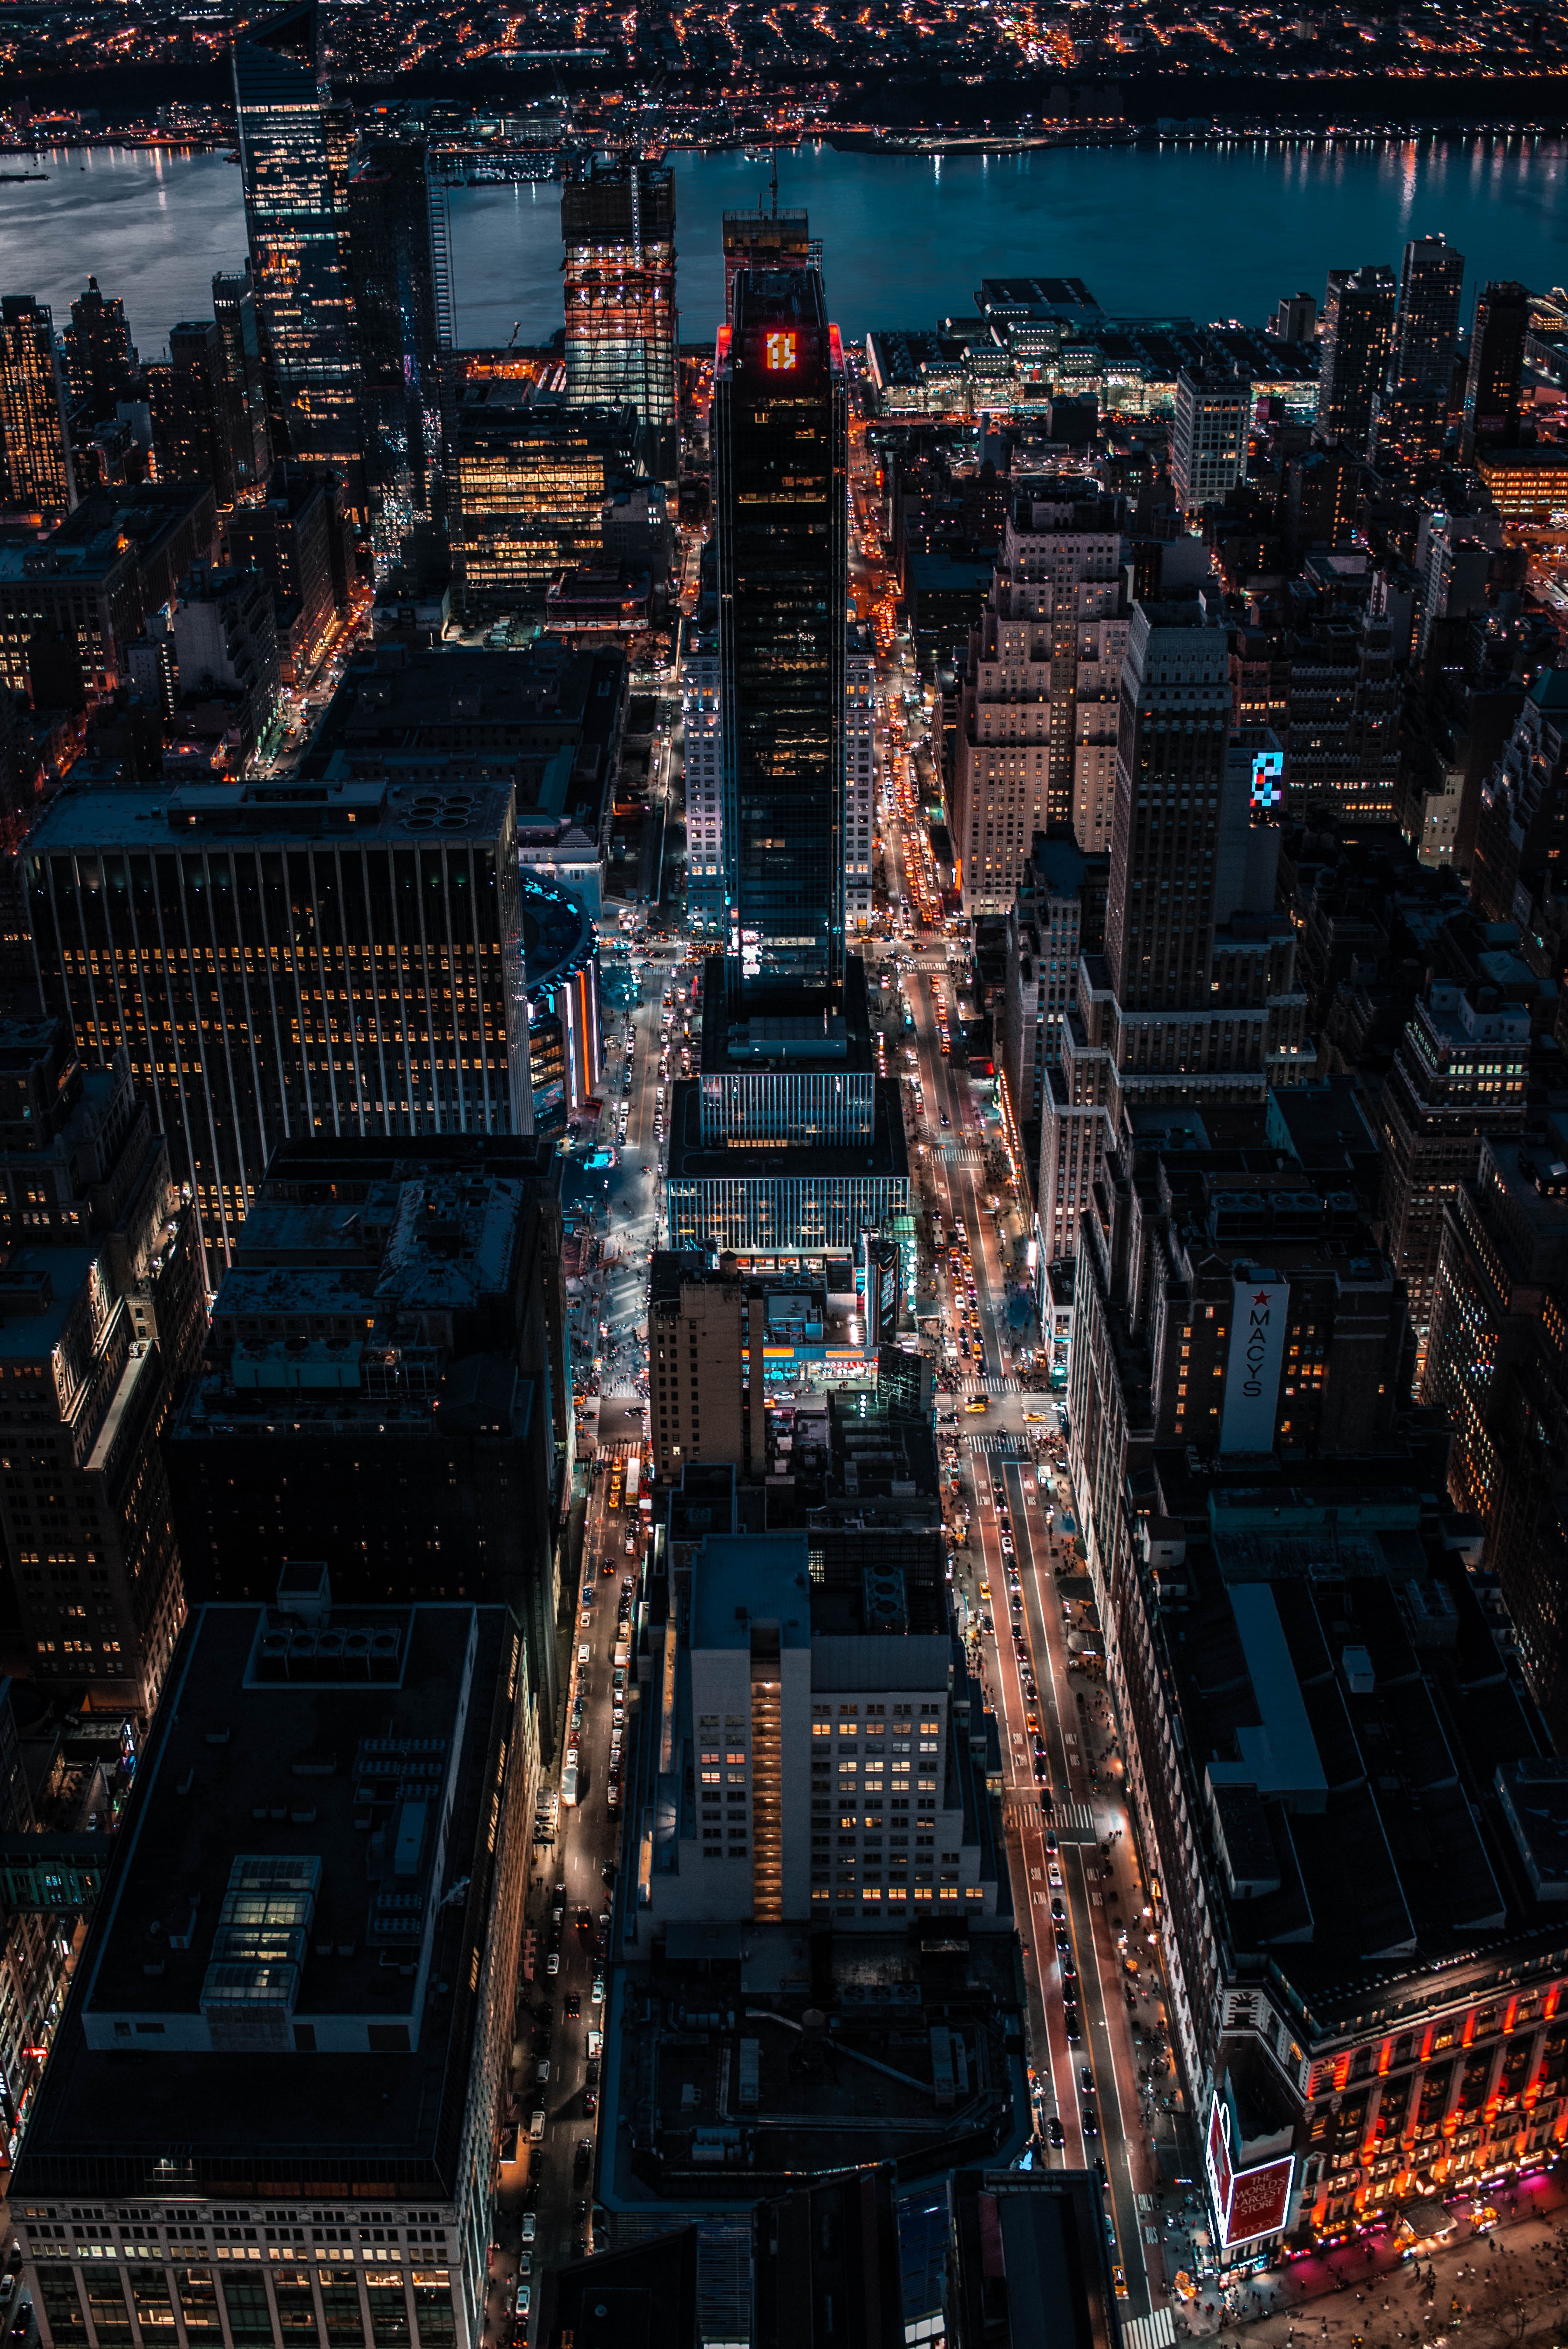 1080p pic building, night city, view from above, skyscrapers